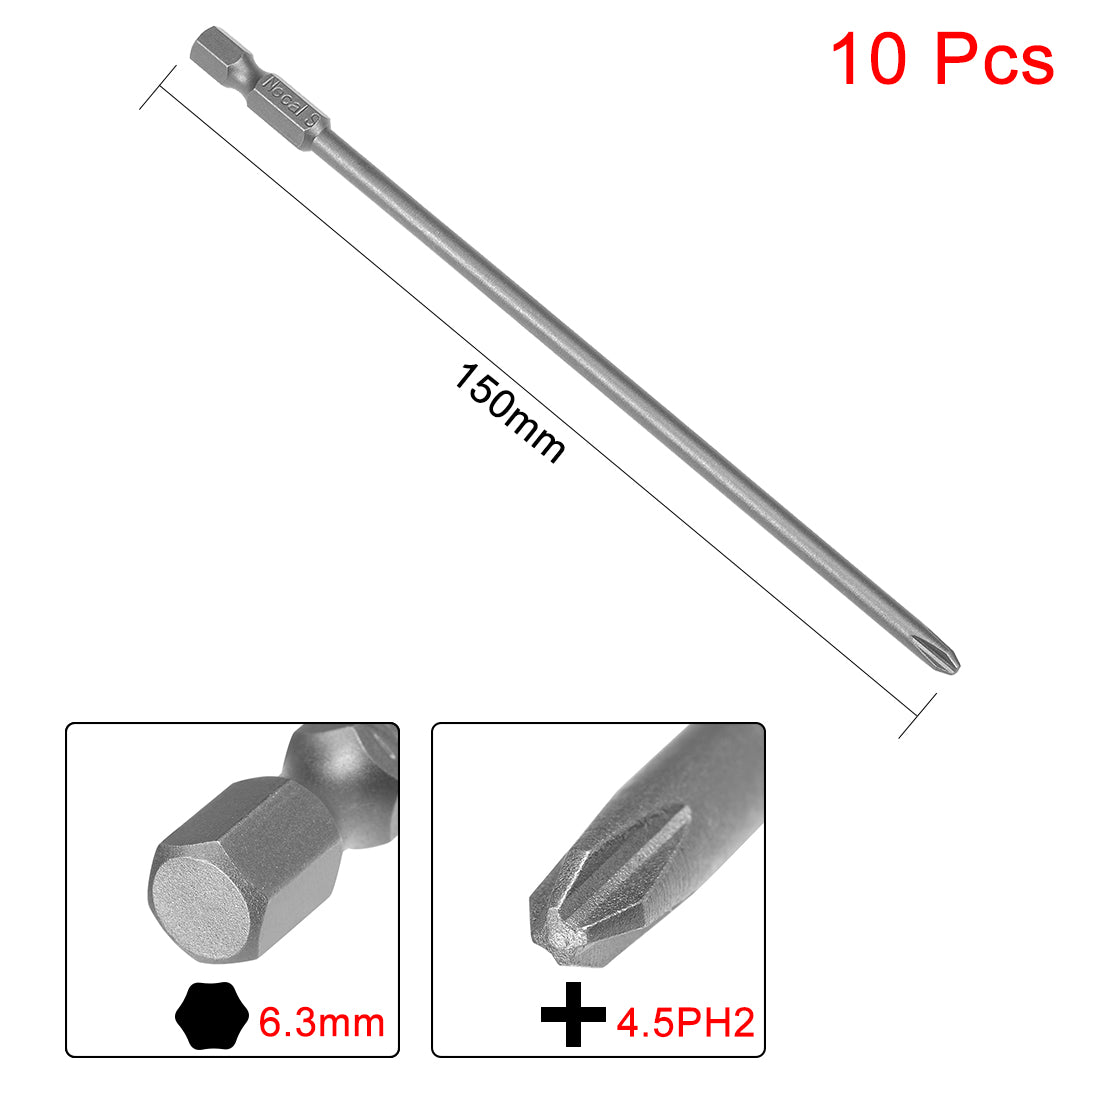 Uxcell Uxcell 10pcs 150mm 1/4" Hex Shank 5mm PH2 Magnetic Phillips Head Screwdriver Bits S2